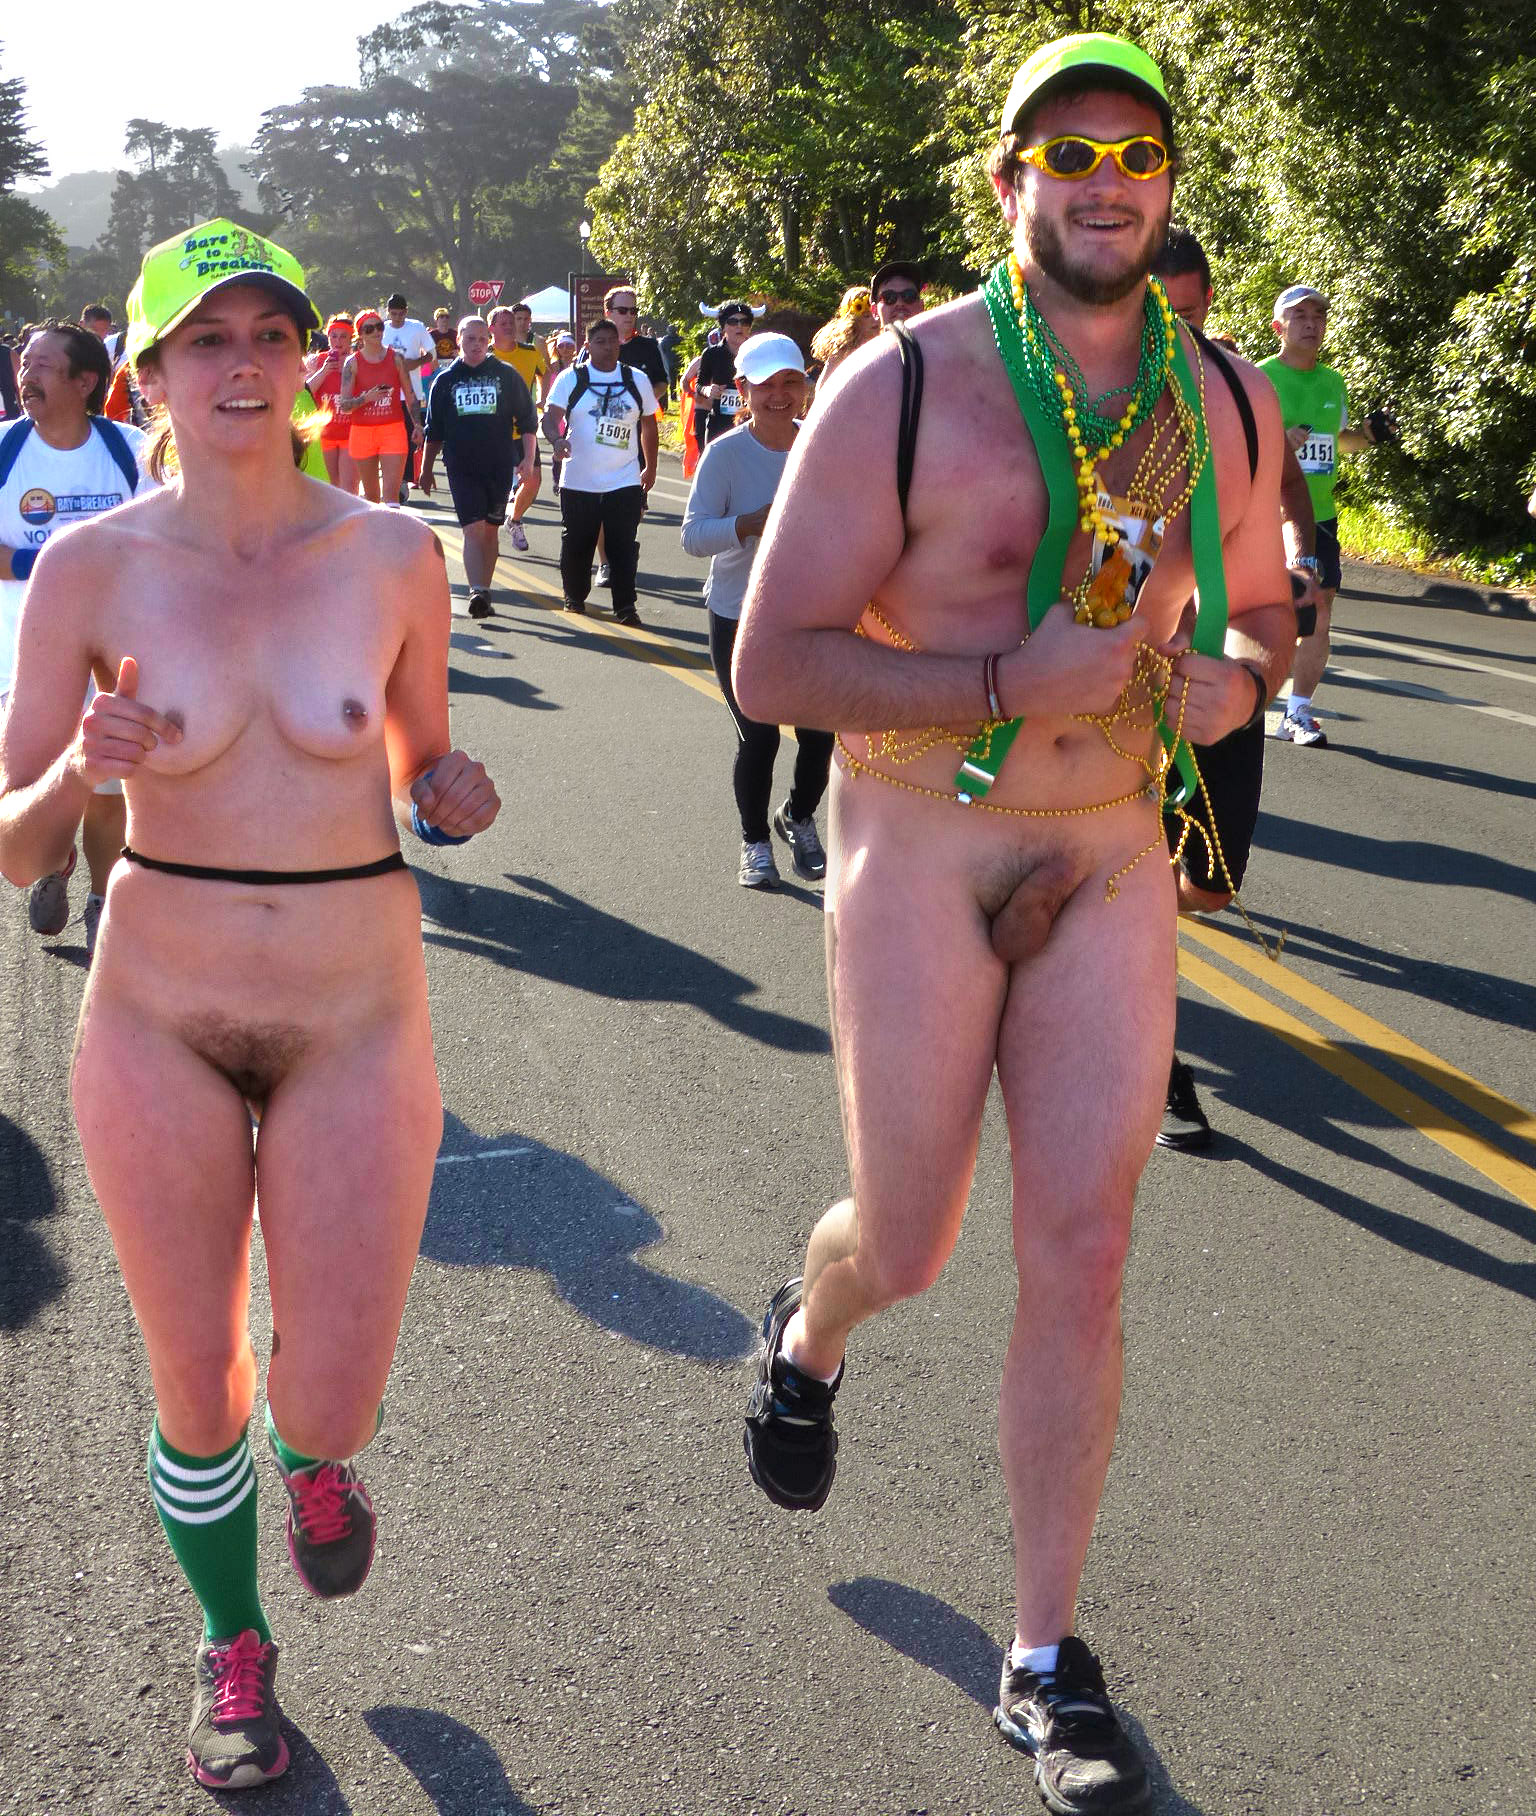 Bay to Breakers - 19 May 2013 - Nudity.